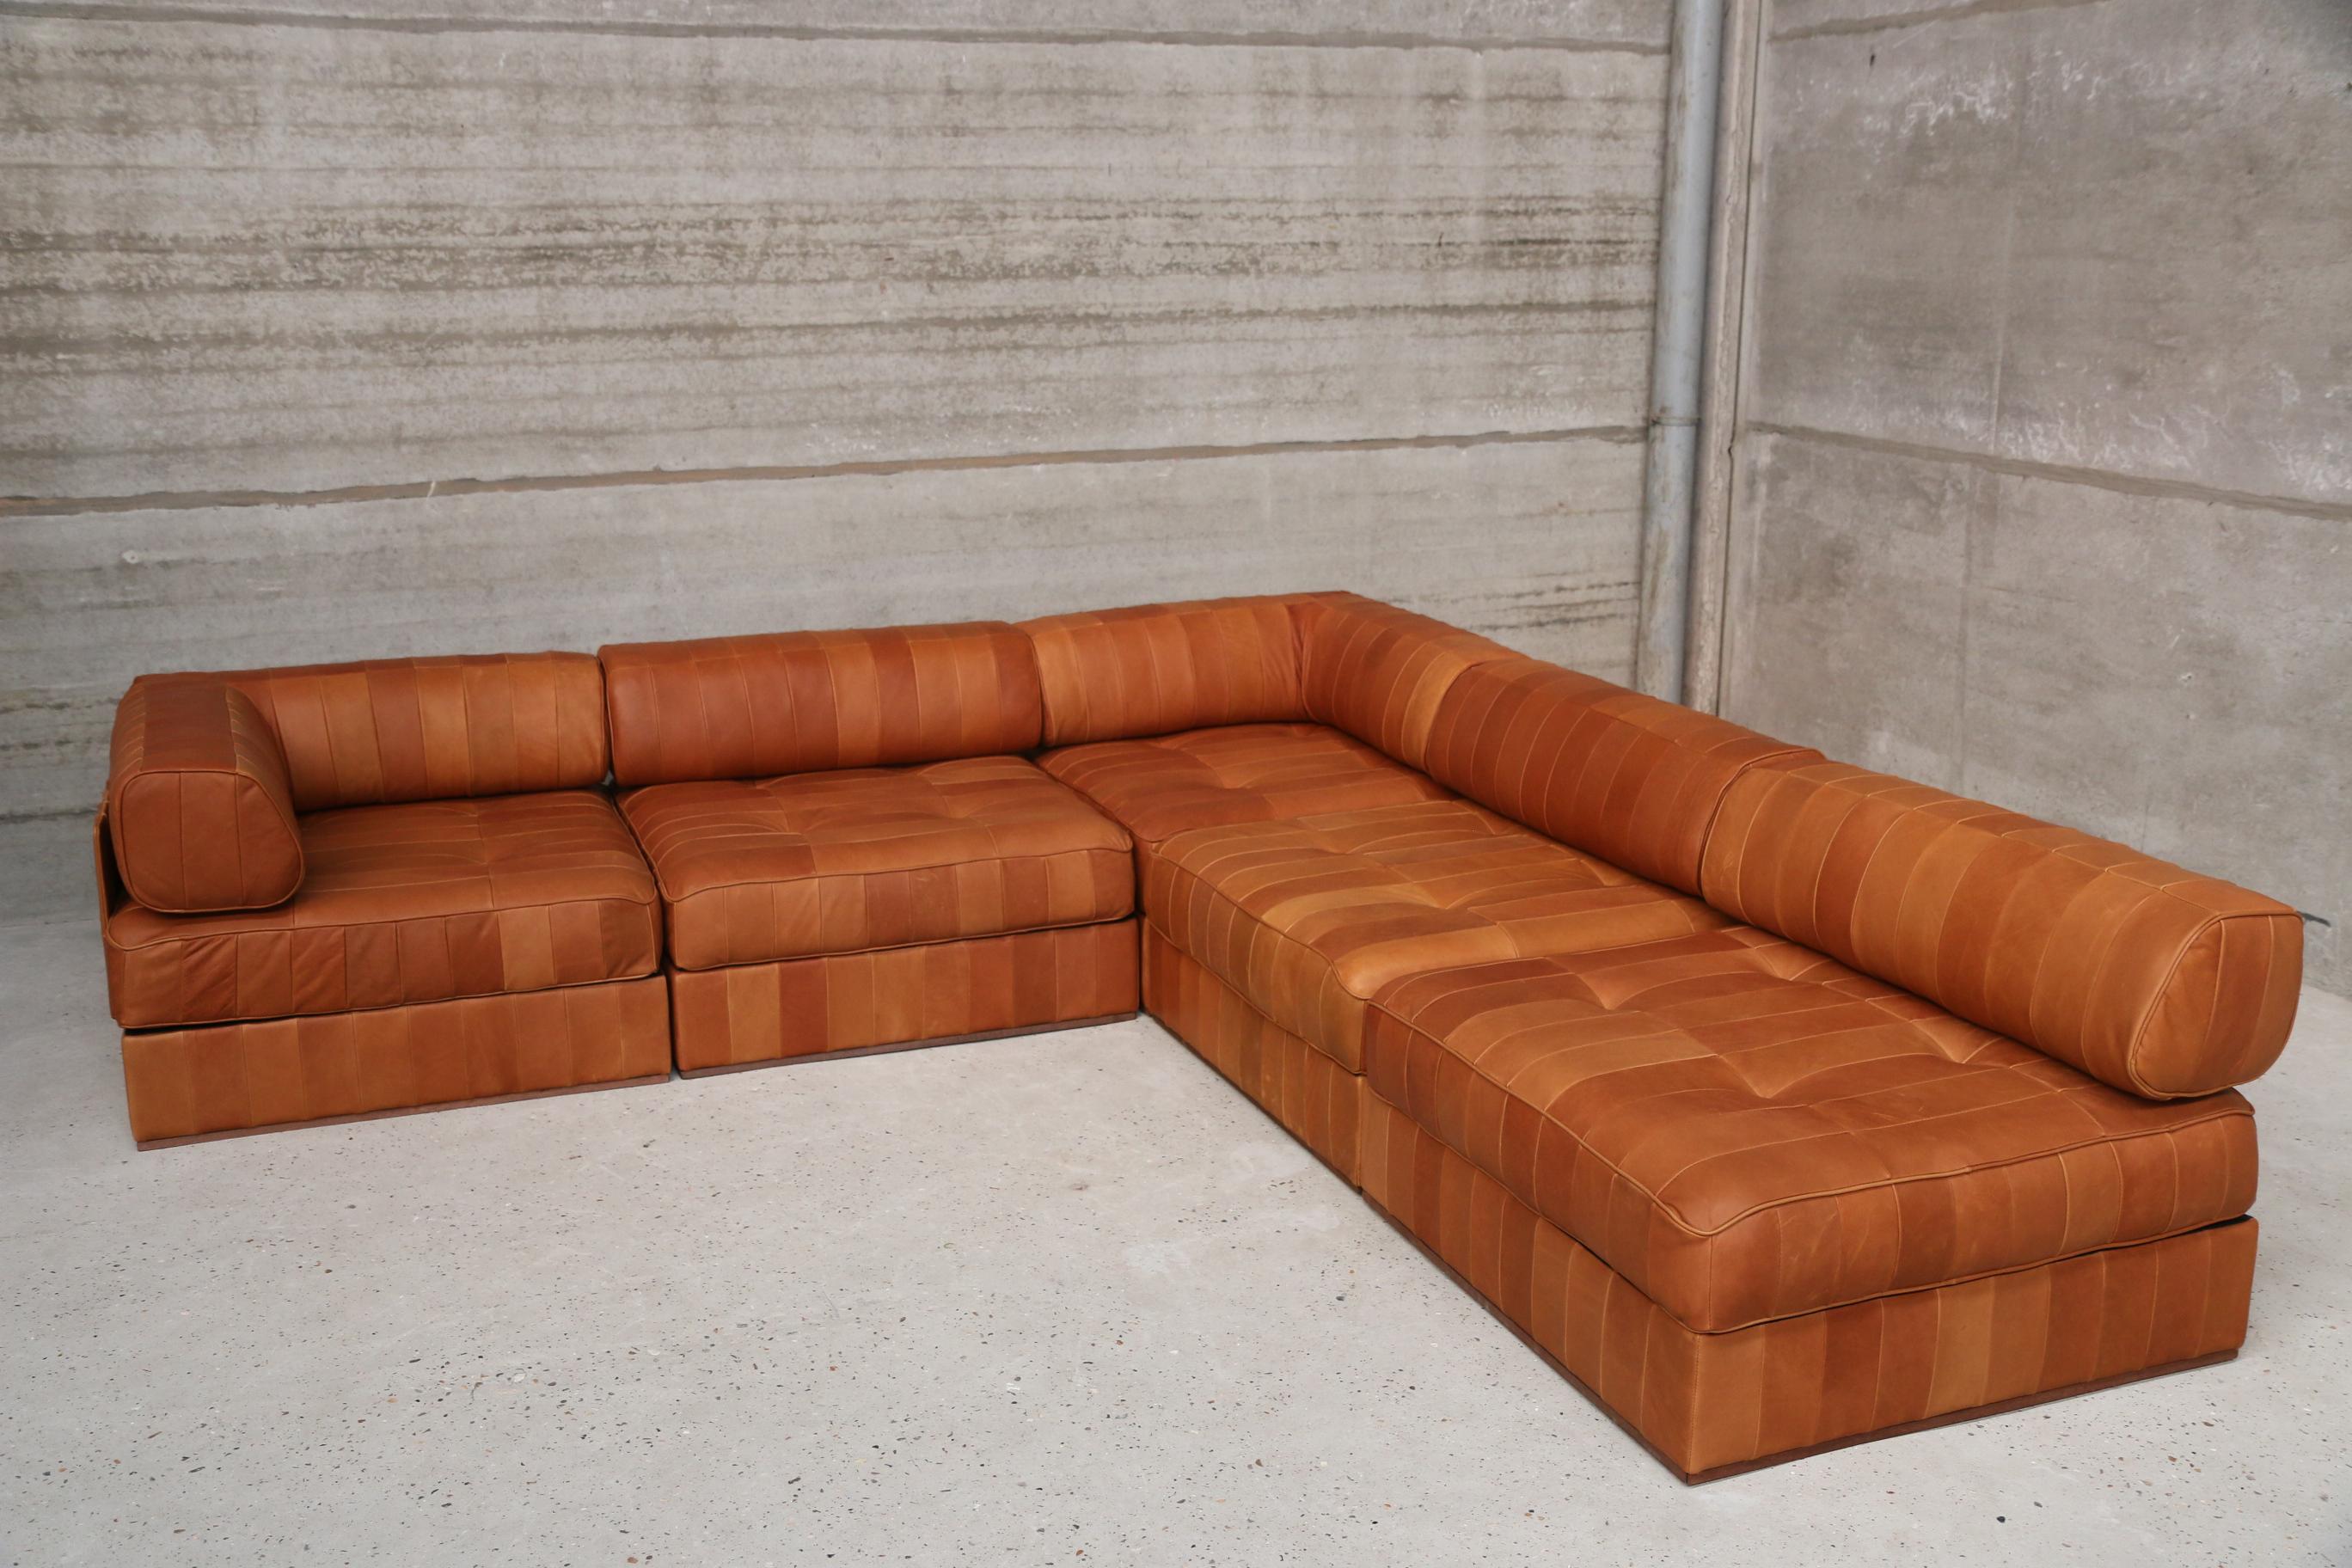 Iconic ds88 modular patchwork sofa restored in our signature vintage aniline leather. New quality foam and new leather. You can play with the modular composition of the sofa. This set consists of 5 modules, 3 normal modules and 2 corner L